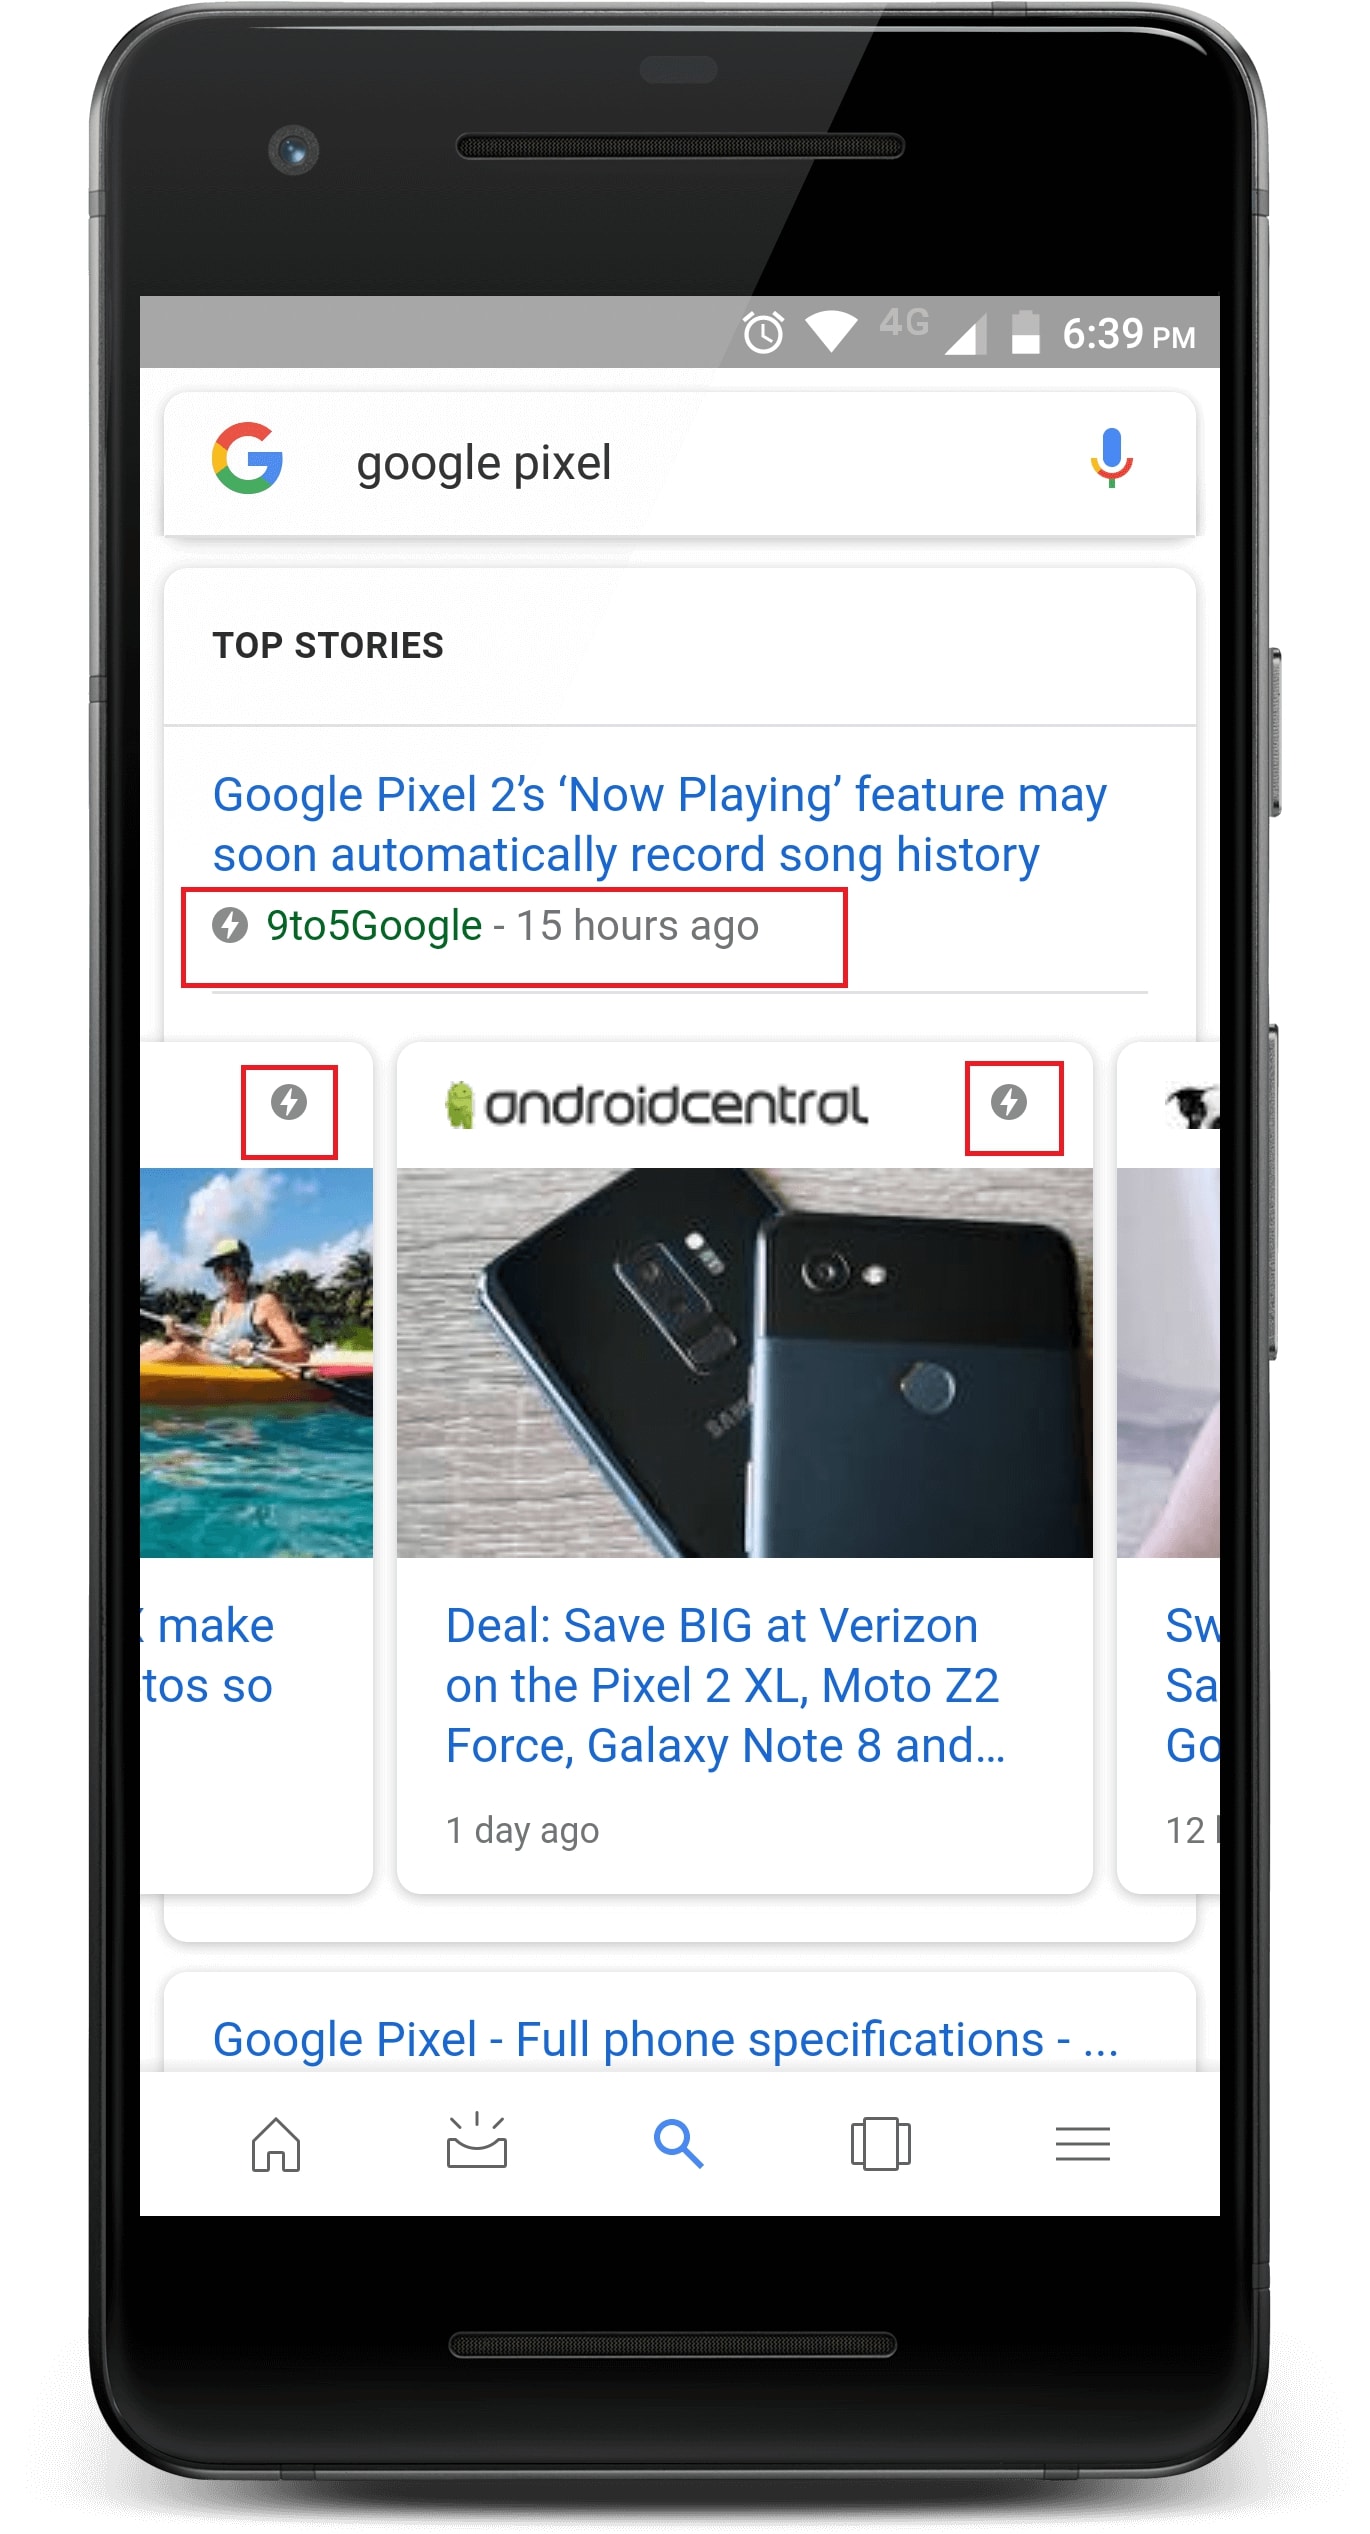 Search result for google pixel. The first story has the AMP logo